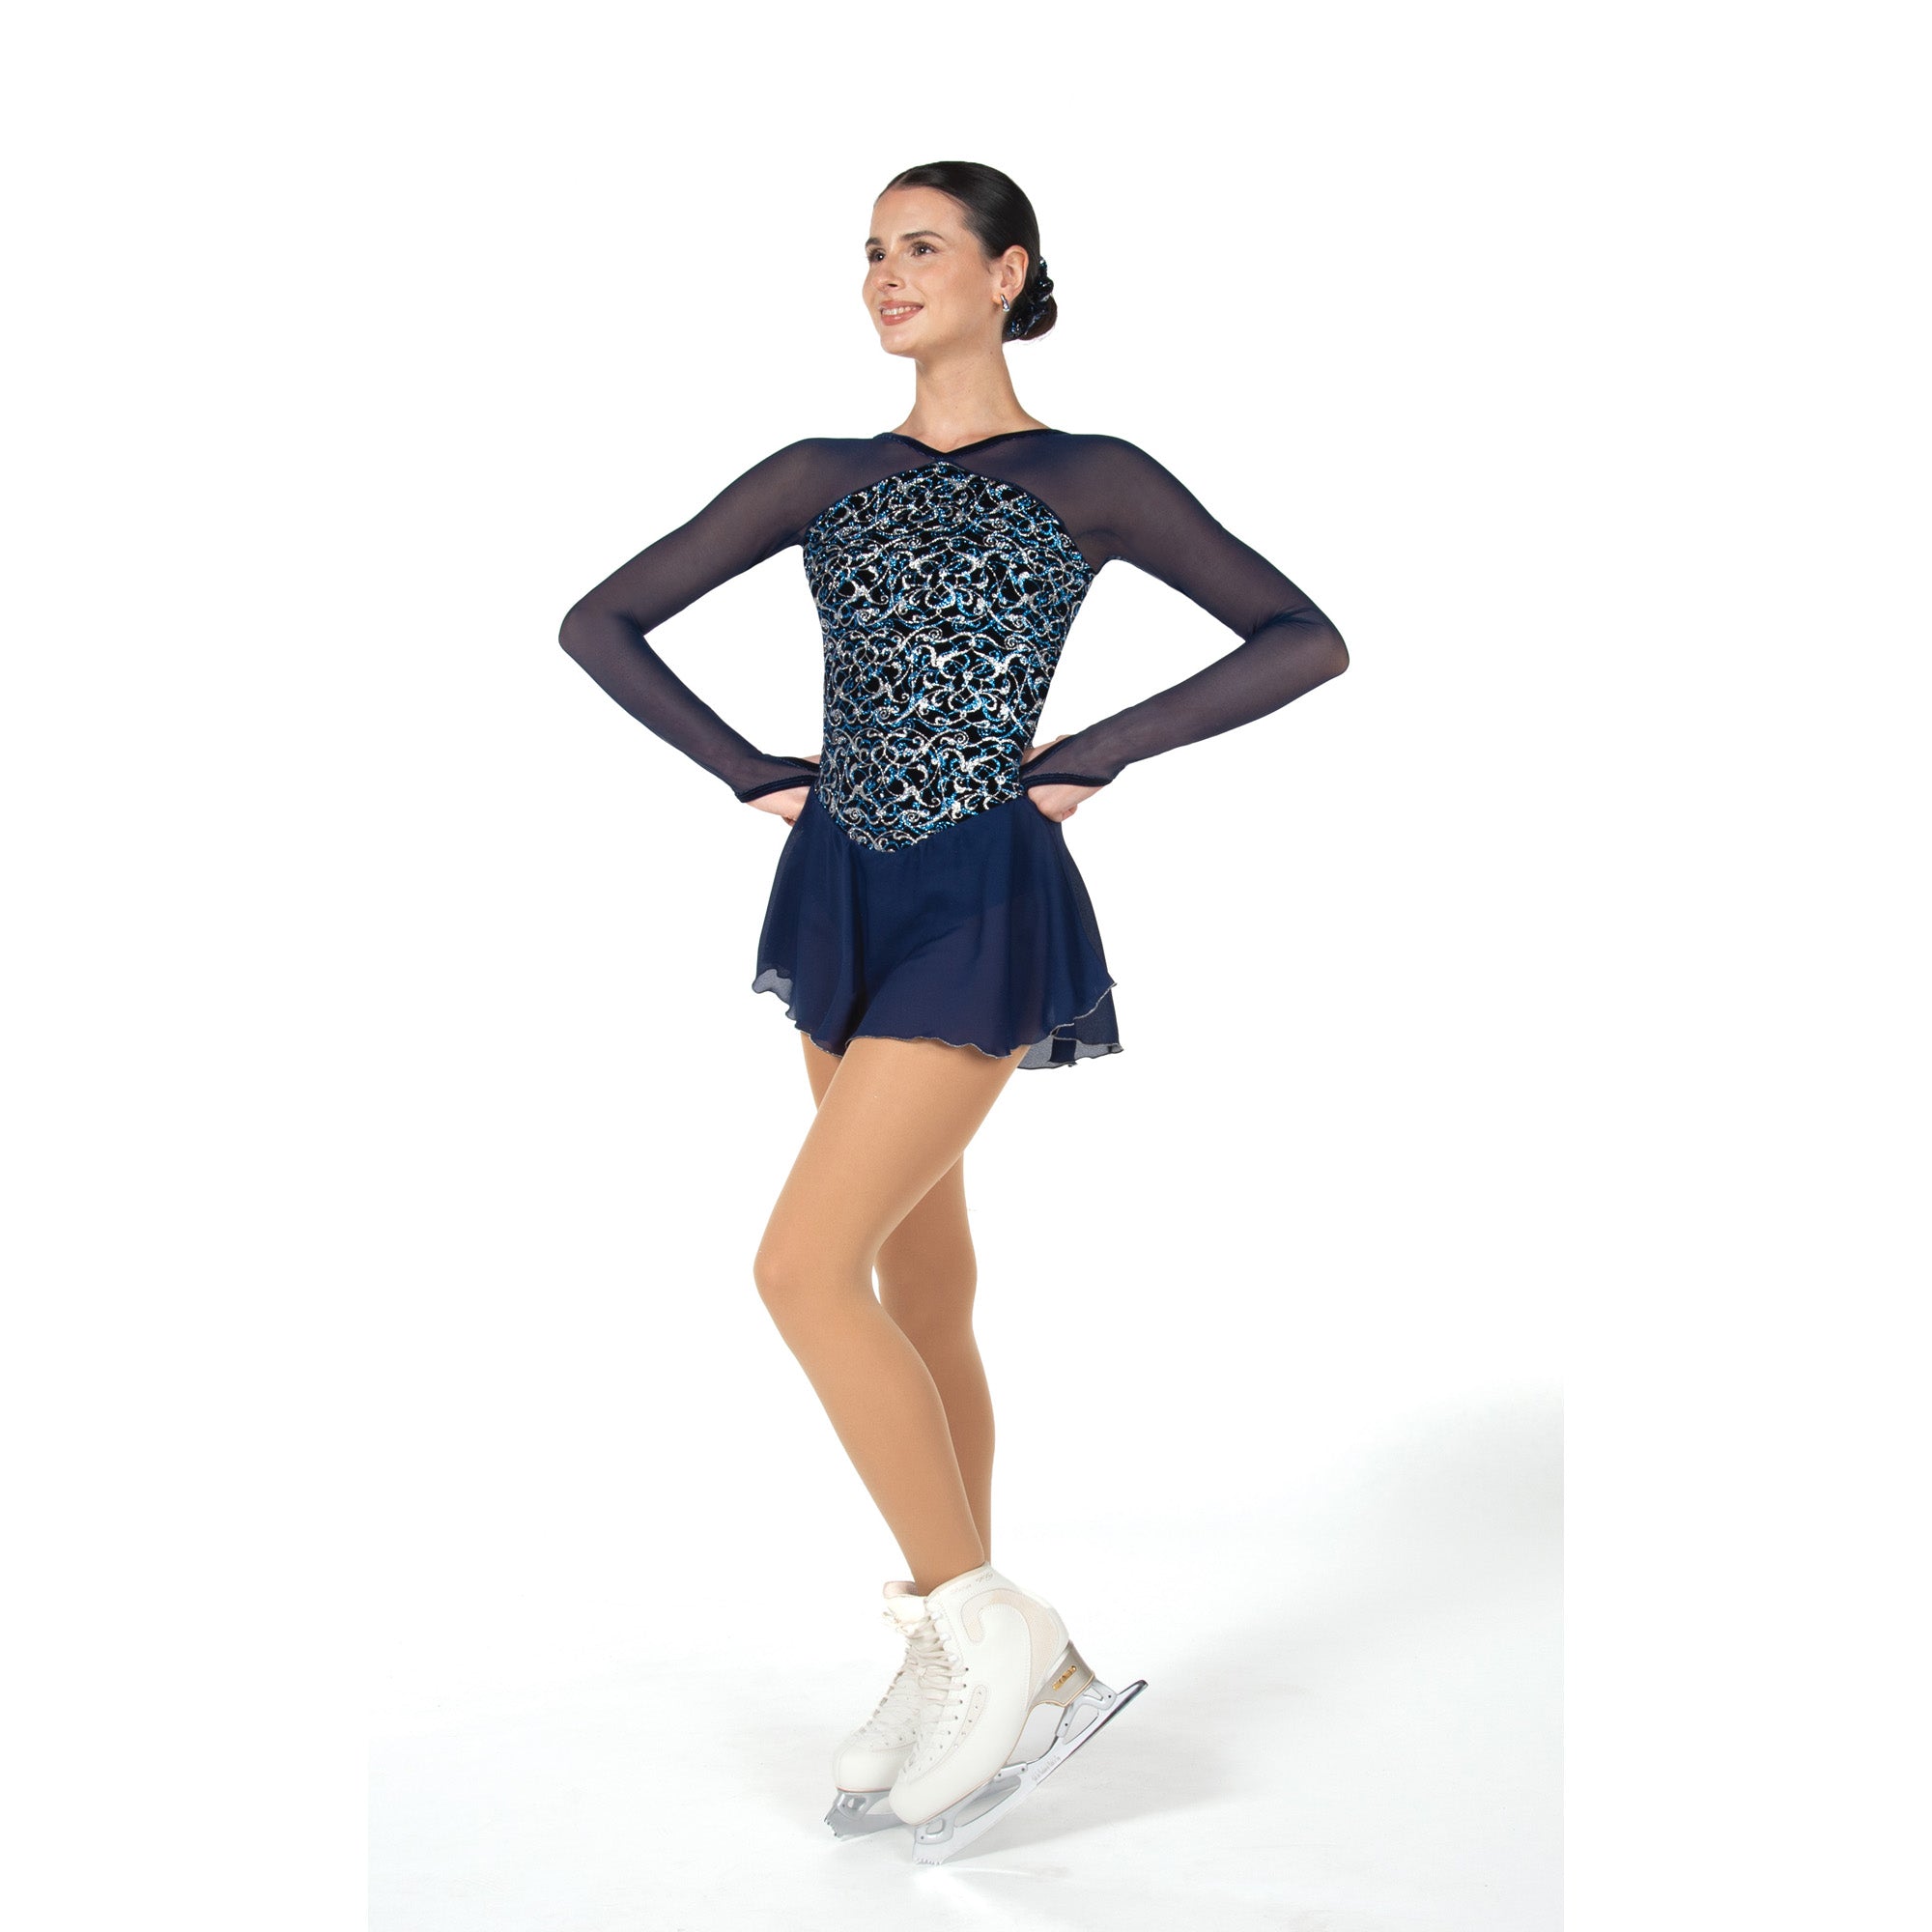 12 Vignette Skating Dress in Navy Blue by Jerry's